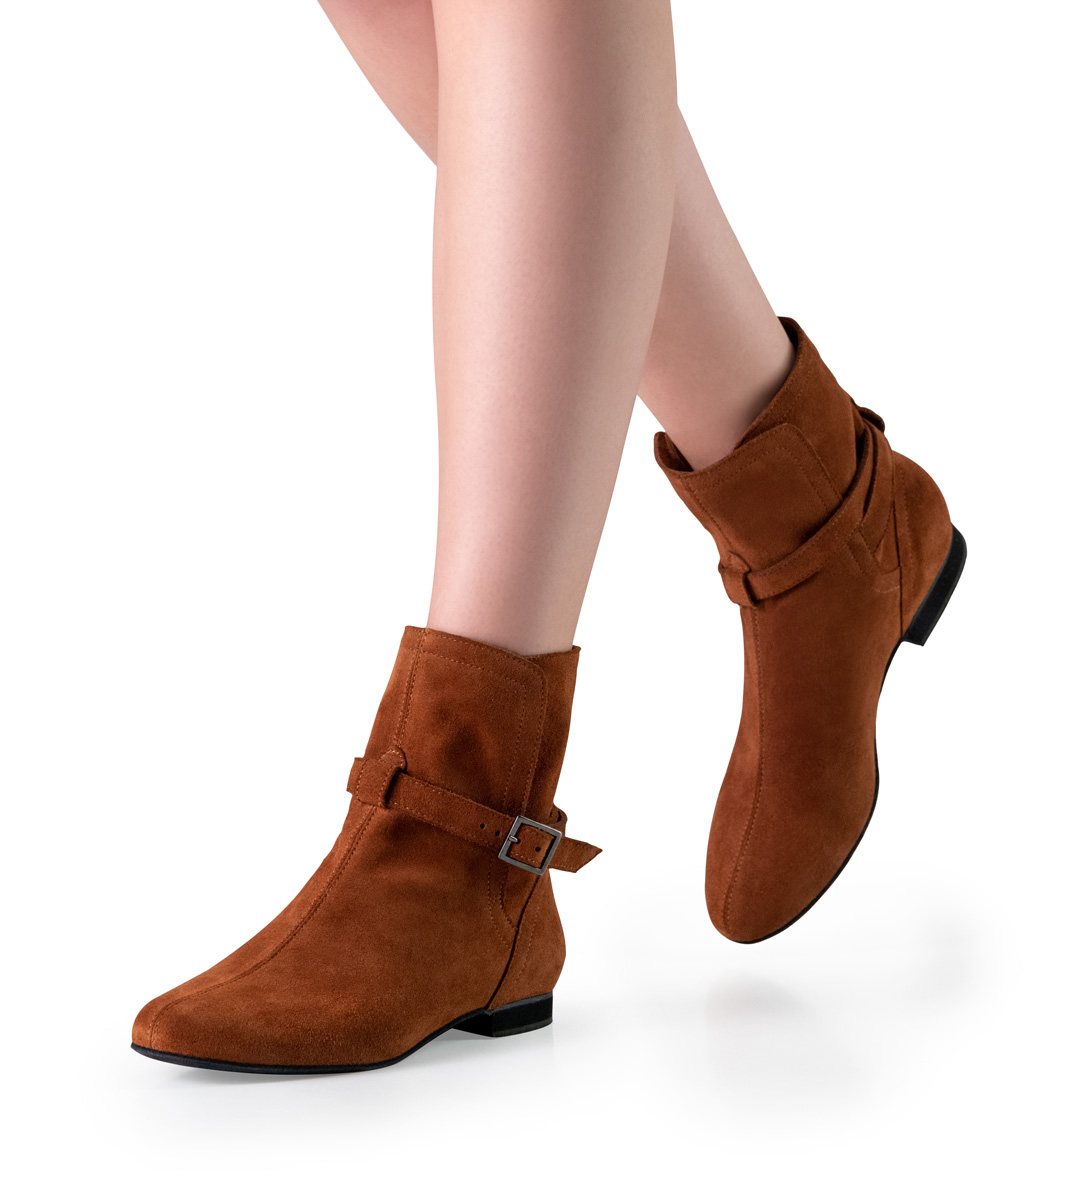 1.5 cm high linedance dance boot from Werner Kern in brown velours